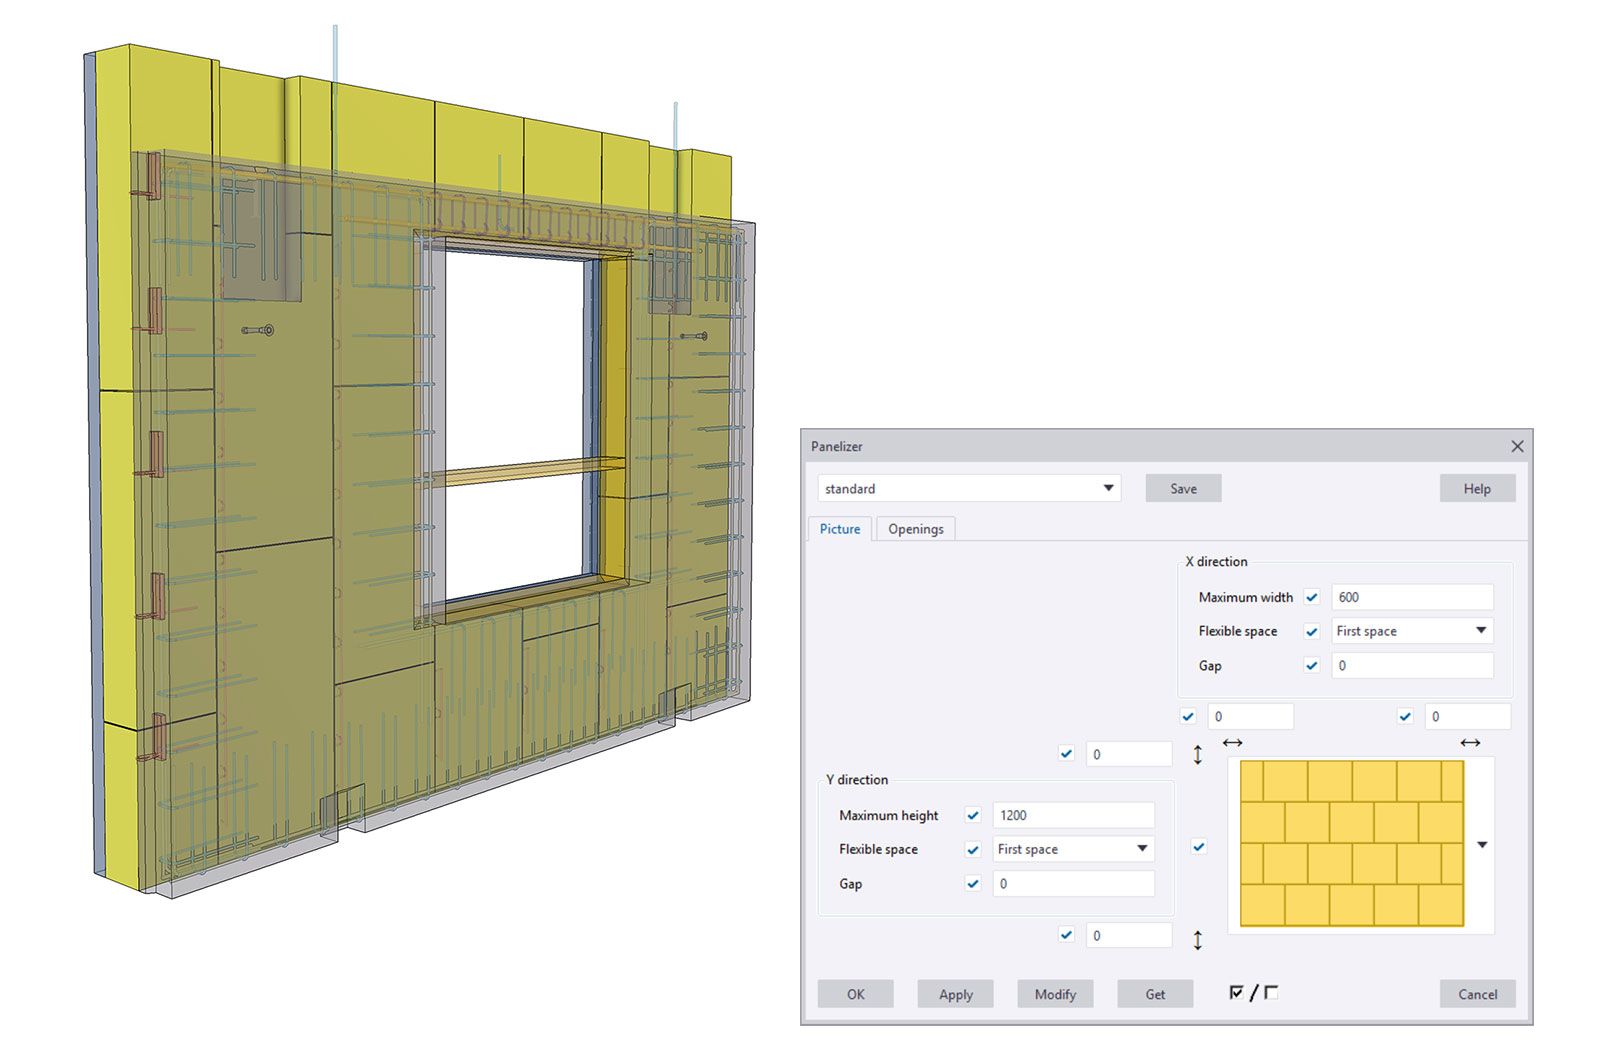 New tool available for panelizing insulation in a wall